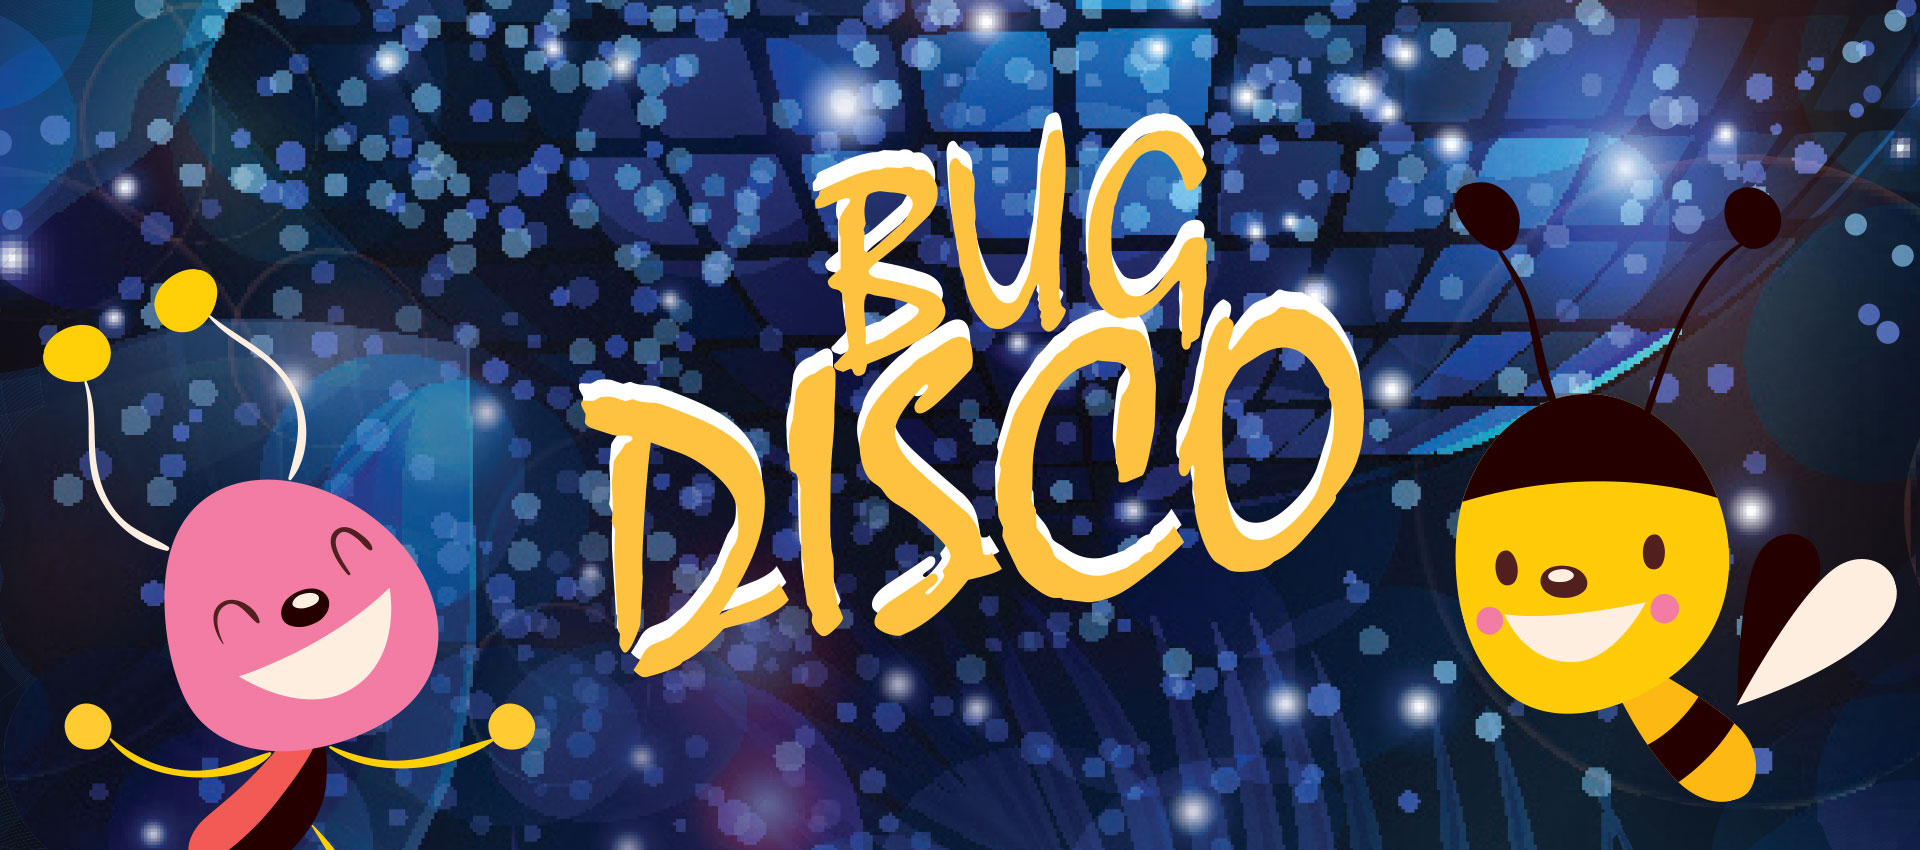 Event title: Bug Disco - two cartoon insects dance against a blue disco background